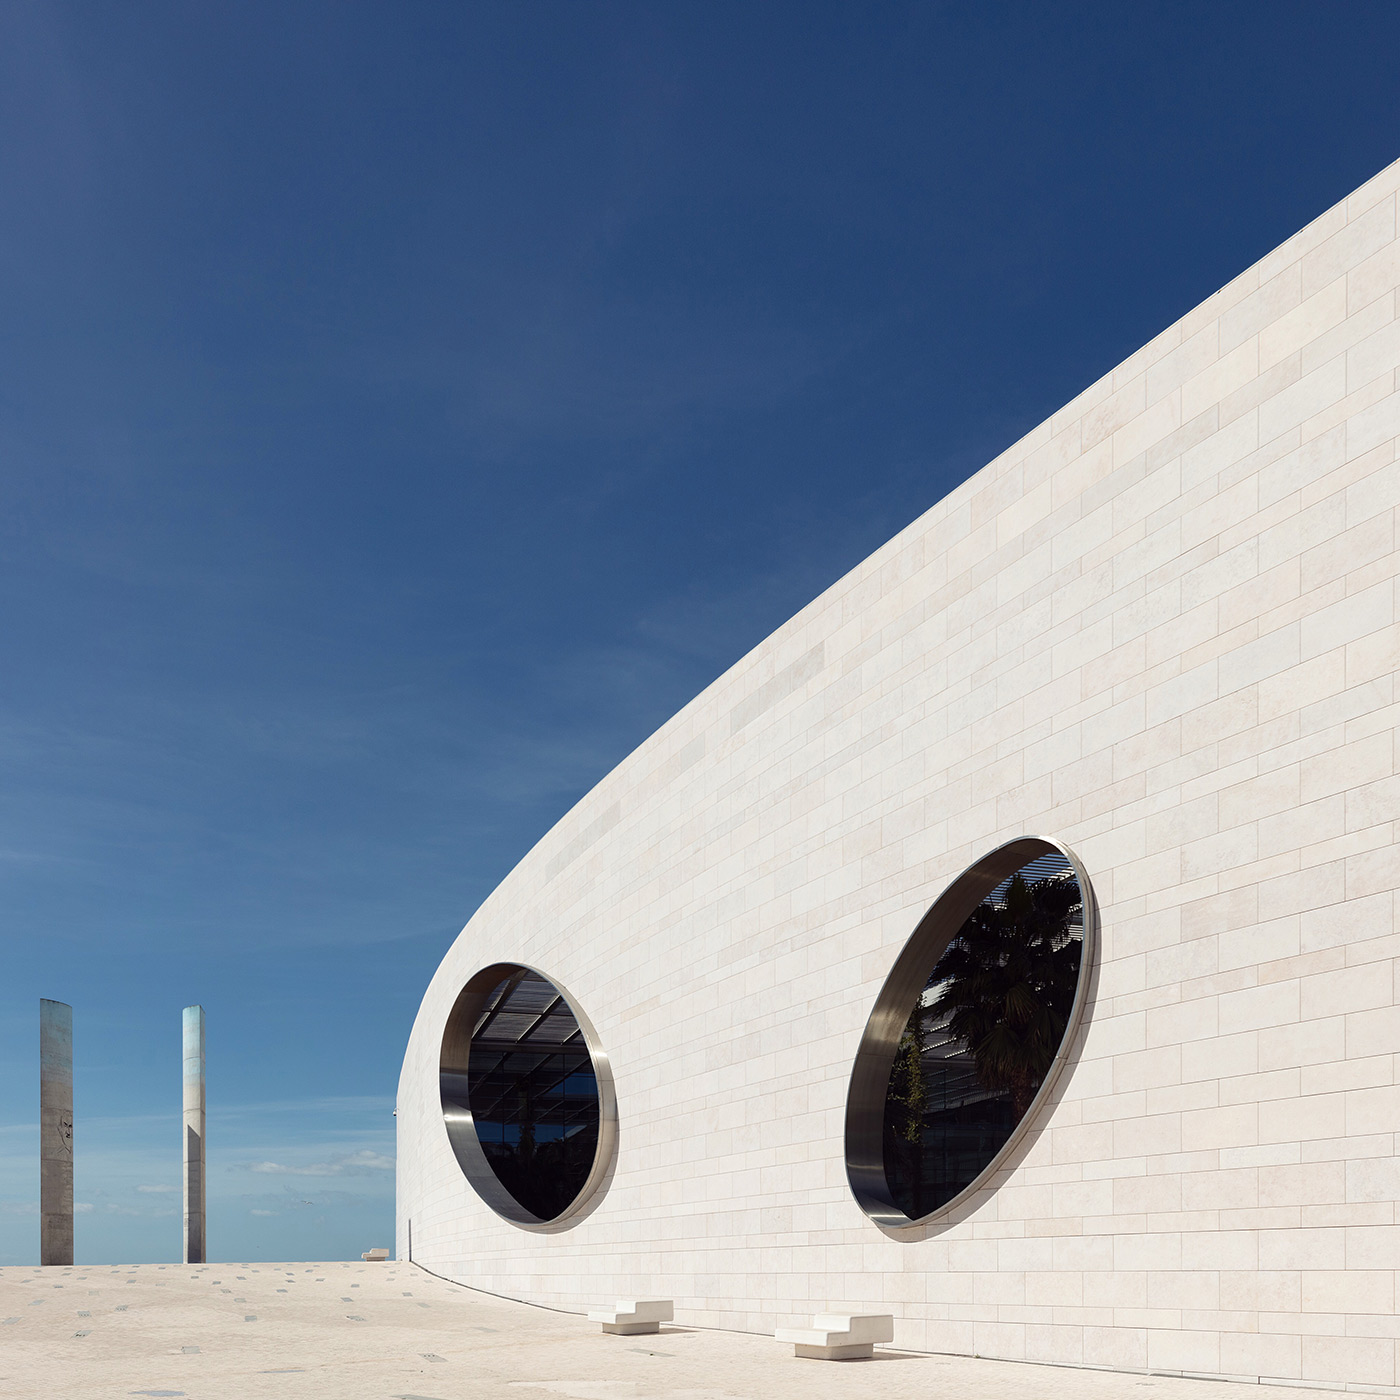 Champalimaud Center for the Unknown . Location: Lisbon, Portugal .  Architect: Charles Correa Associates